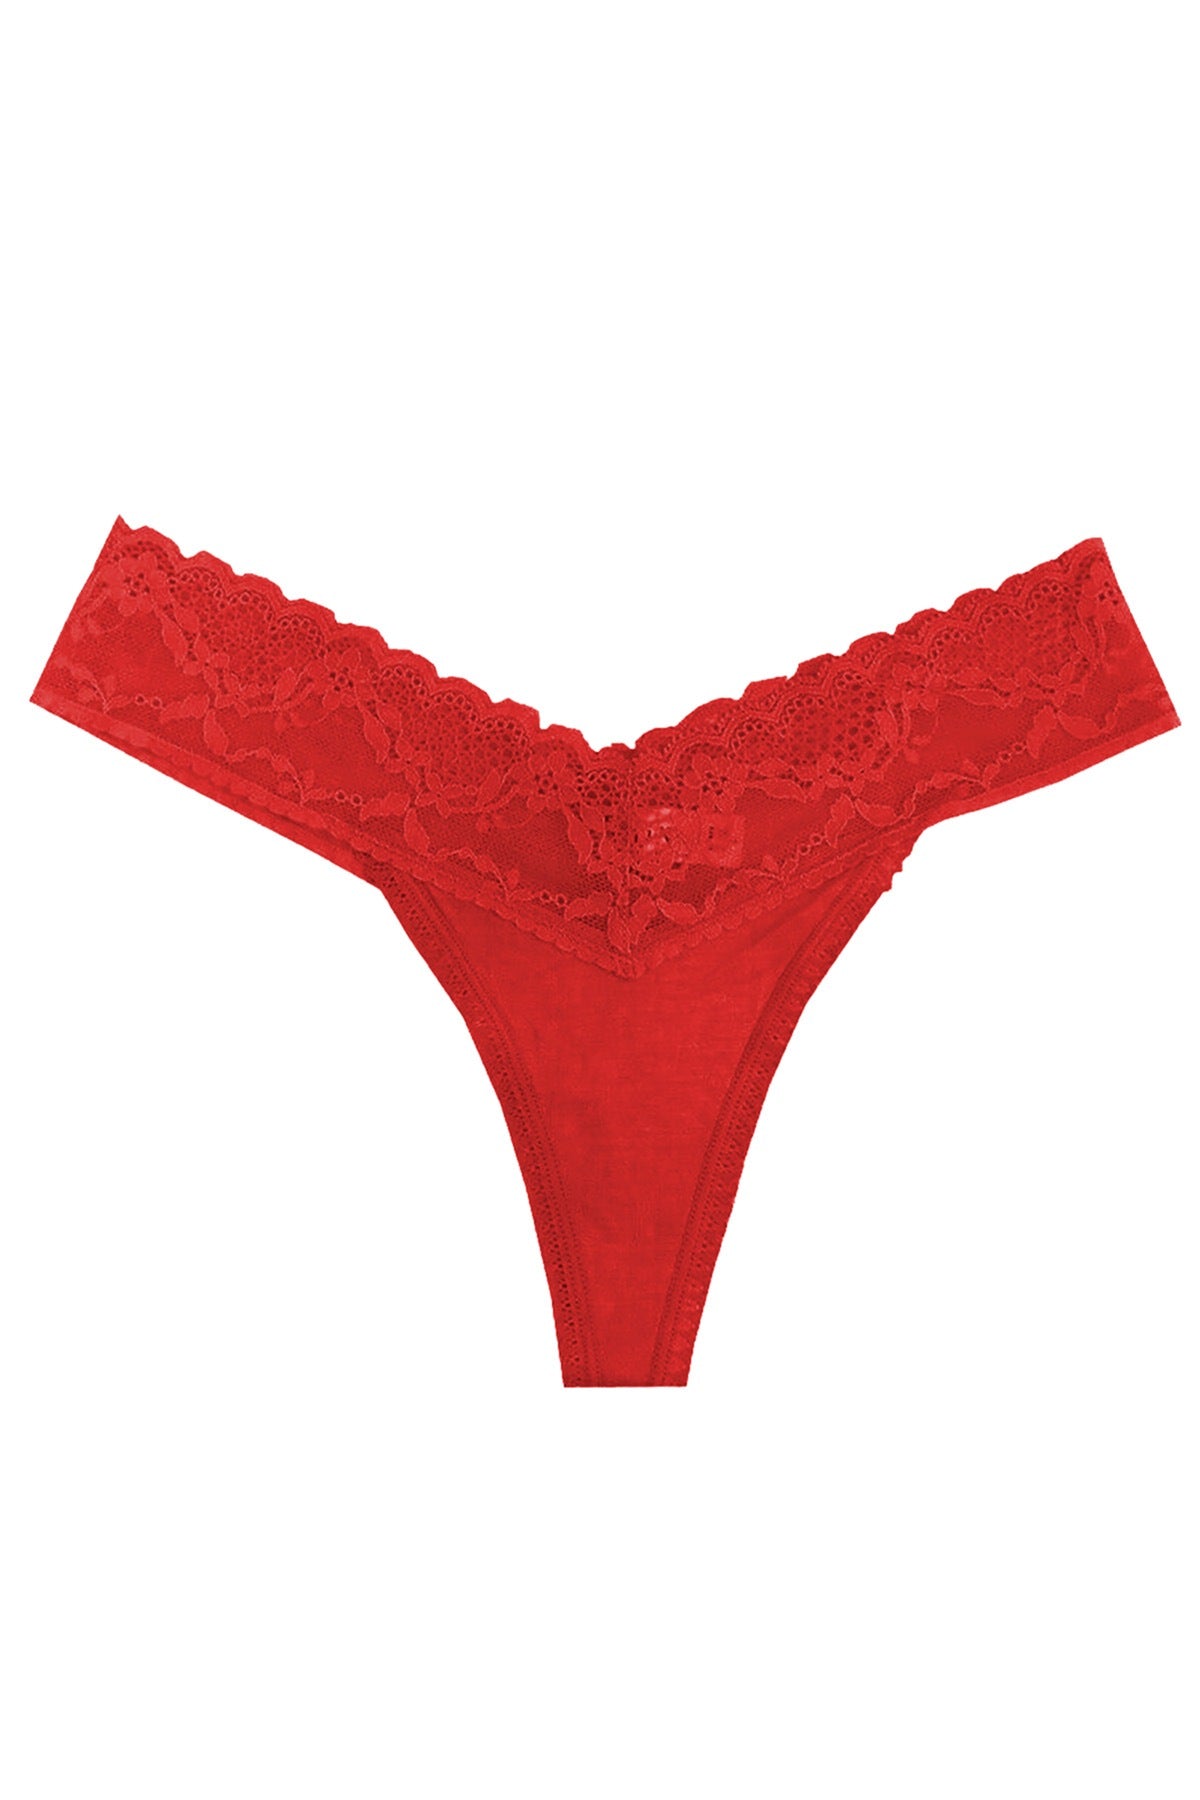 Felina True Red Timeless Low Rise Lace Thong